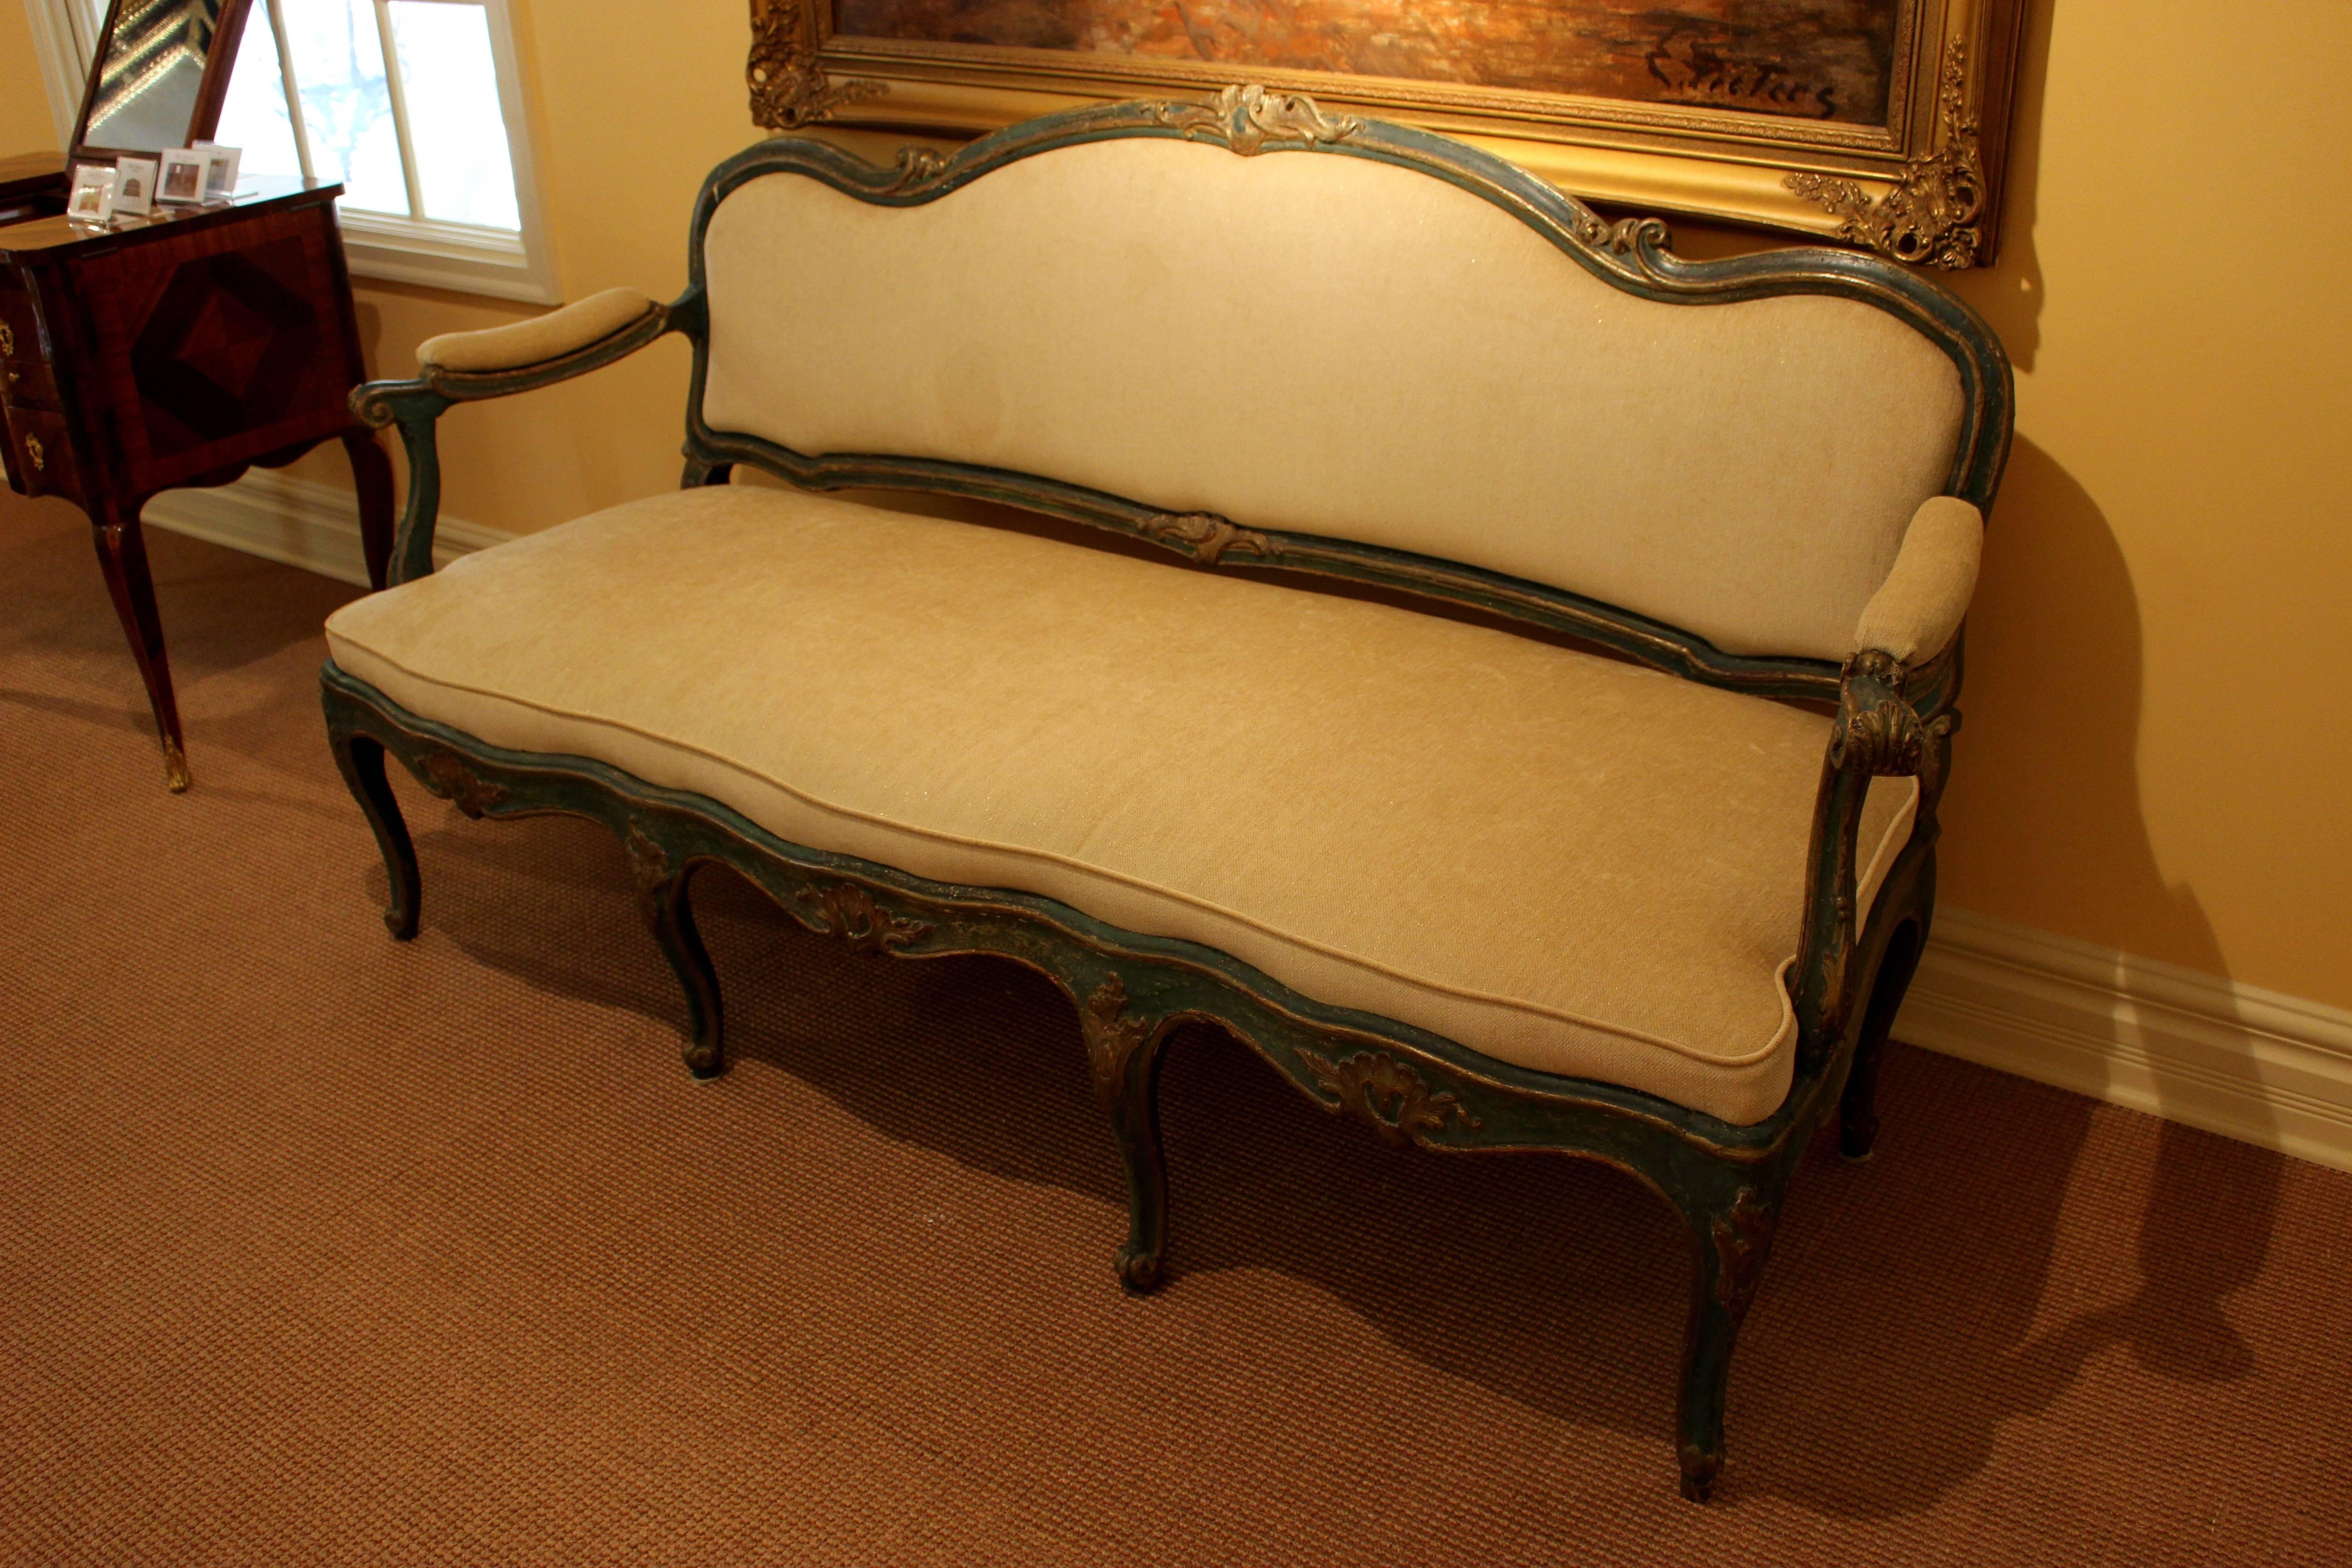 A North Italian green-painted and parcel-gilt settee from the mid-18th century. The serpentine padded backrest displays foliate scrolls on the top rail flanked by two scrolls above a serpentine padded seat. Down-scrolled padded armrests flank the